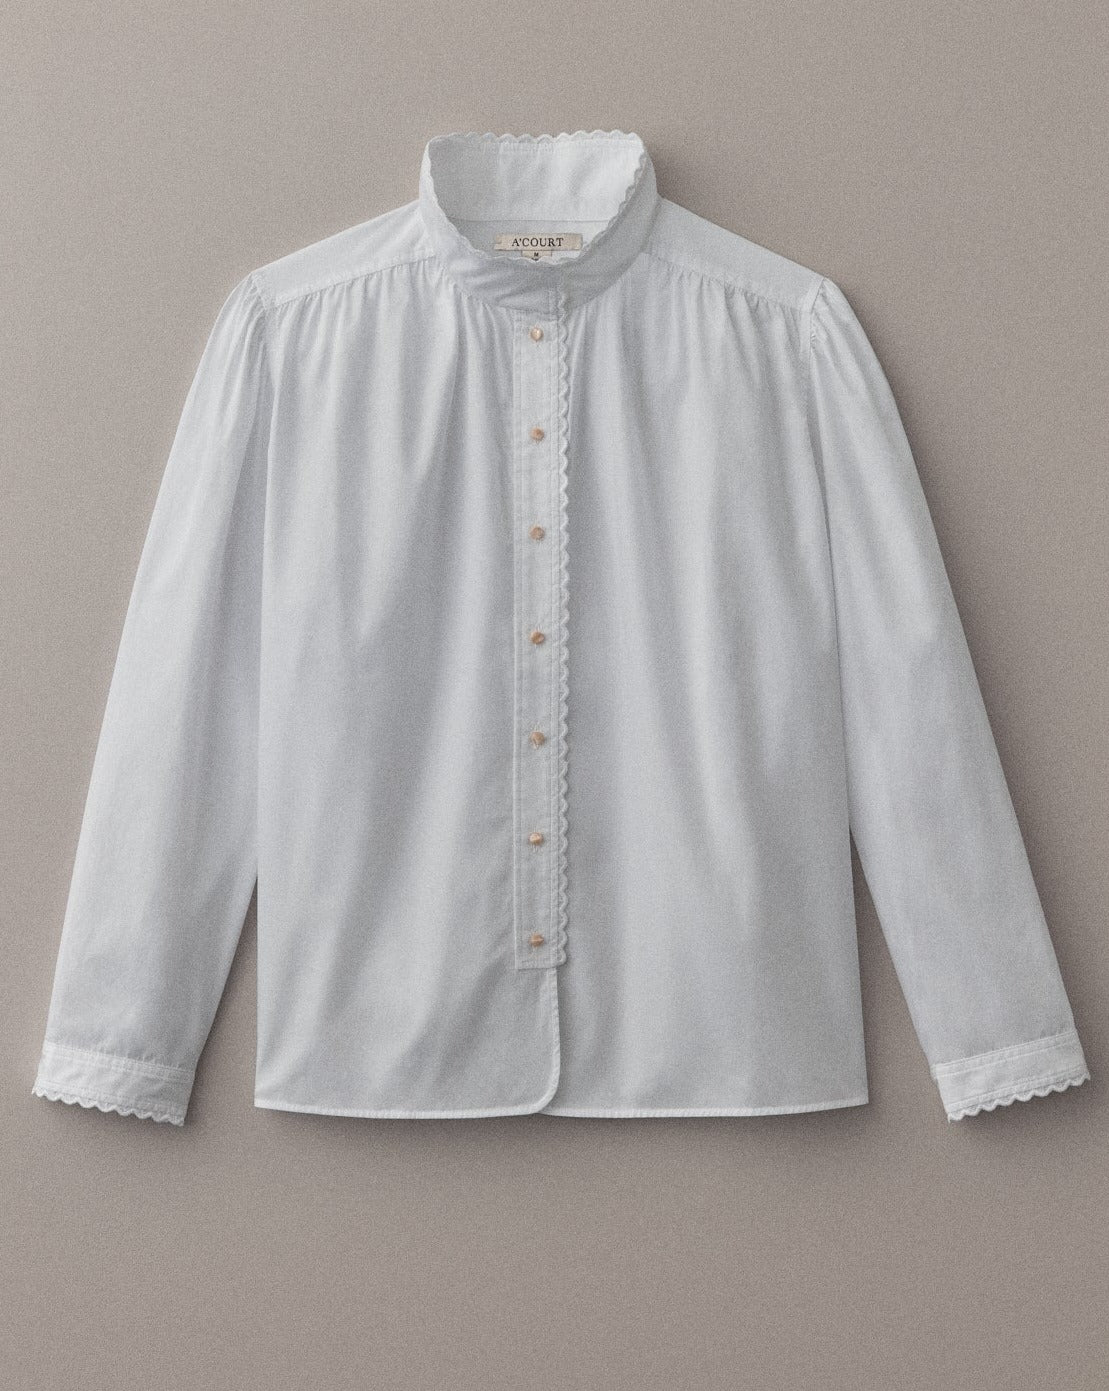 A long sleeve blouse in white cotton with eyelet trim at the collar and cuffs lies on a light brown field. 